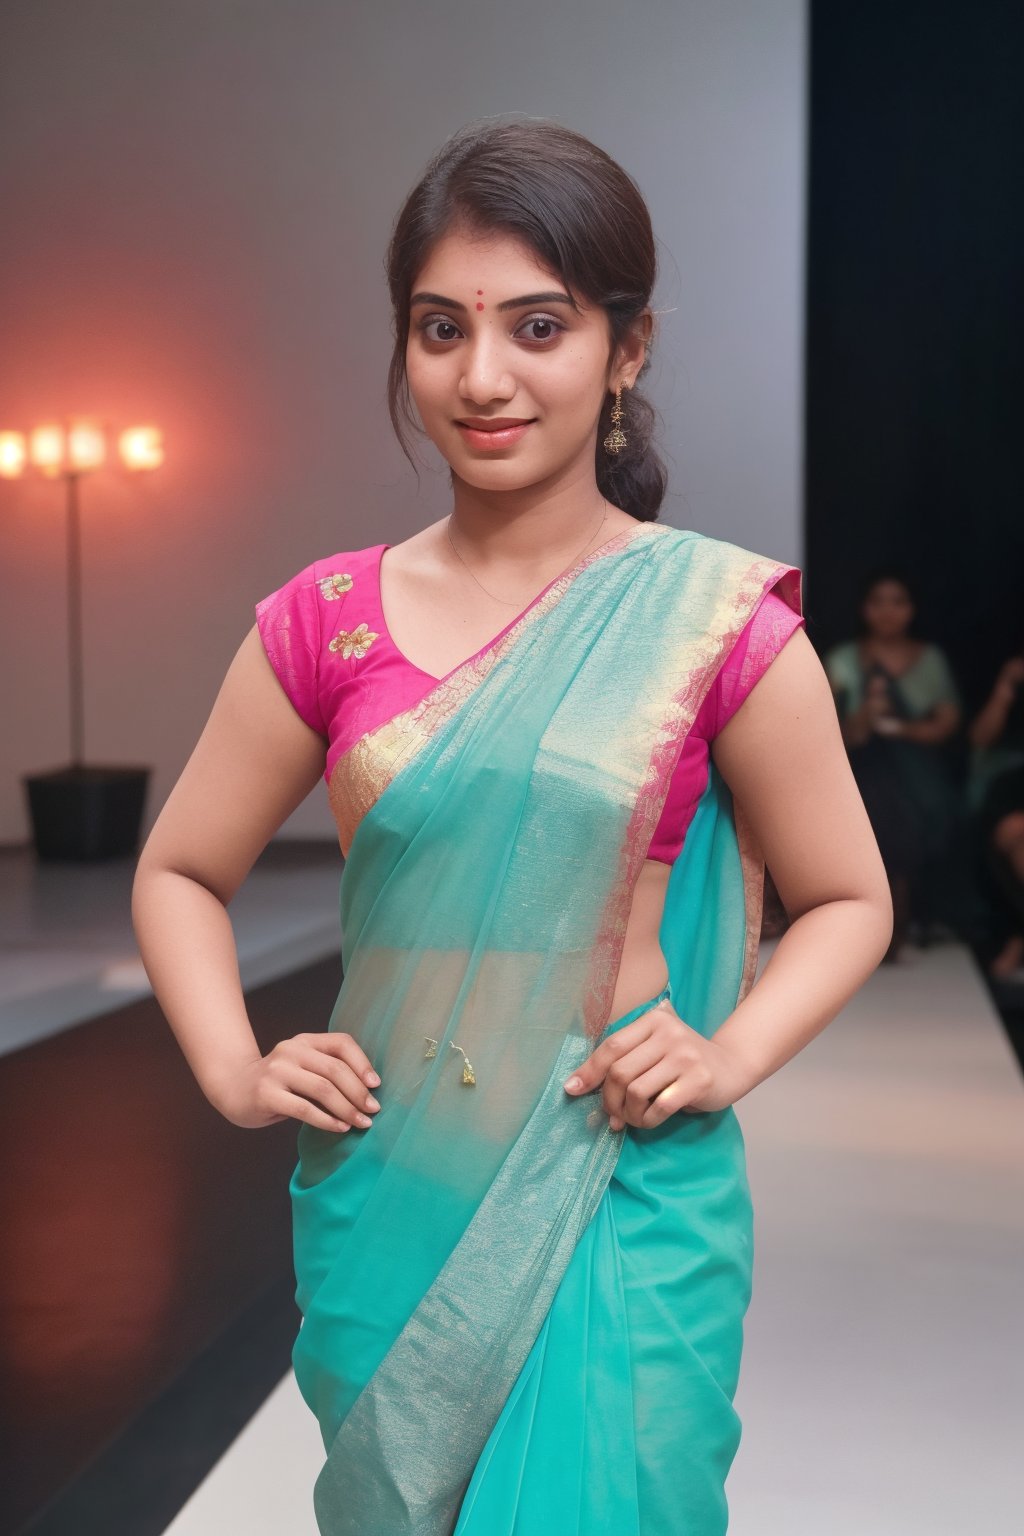 A striking image: Saree, a stunning 20-year-old Tamil girl, confidently struts down the catwalk in her custom-made holographic neon fashionwear, bathed in soft focus and matte lighting with a subtle soft-glow effect. Her gaze meets the audience's, exuding professionalism as the classic light fringe framing her face creates a sense of sophistication. The blurred bokeh effect in the background adds depth, while the SFM-rendered attire accentuates her svelte figure.